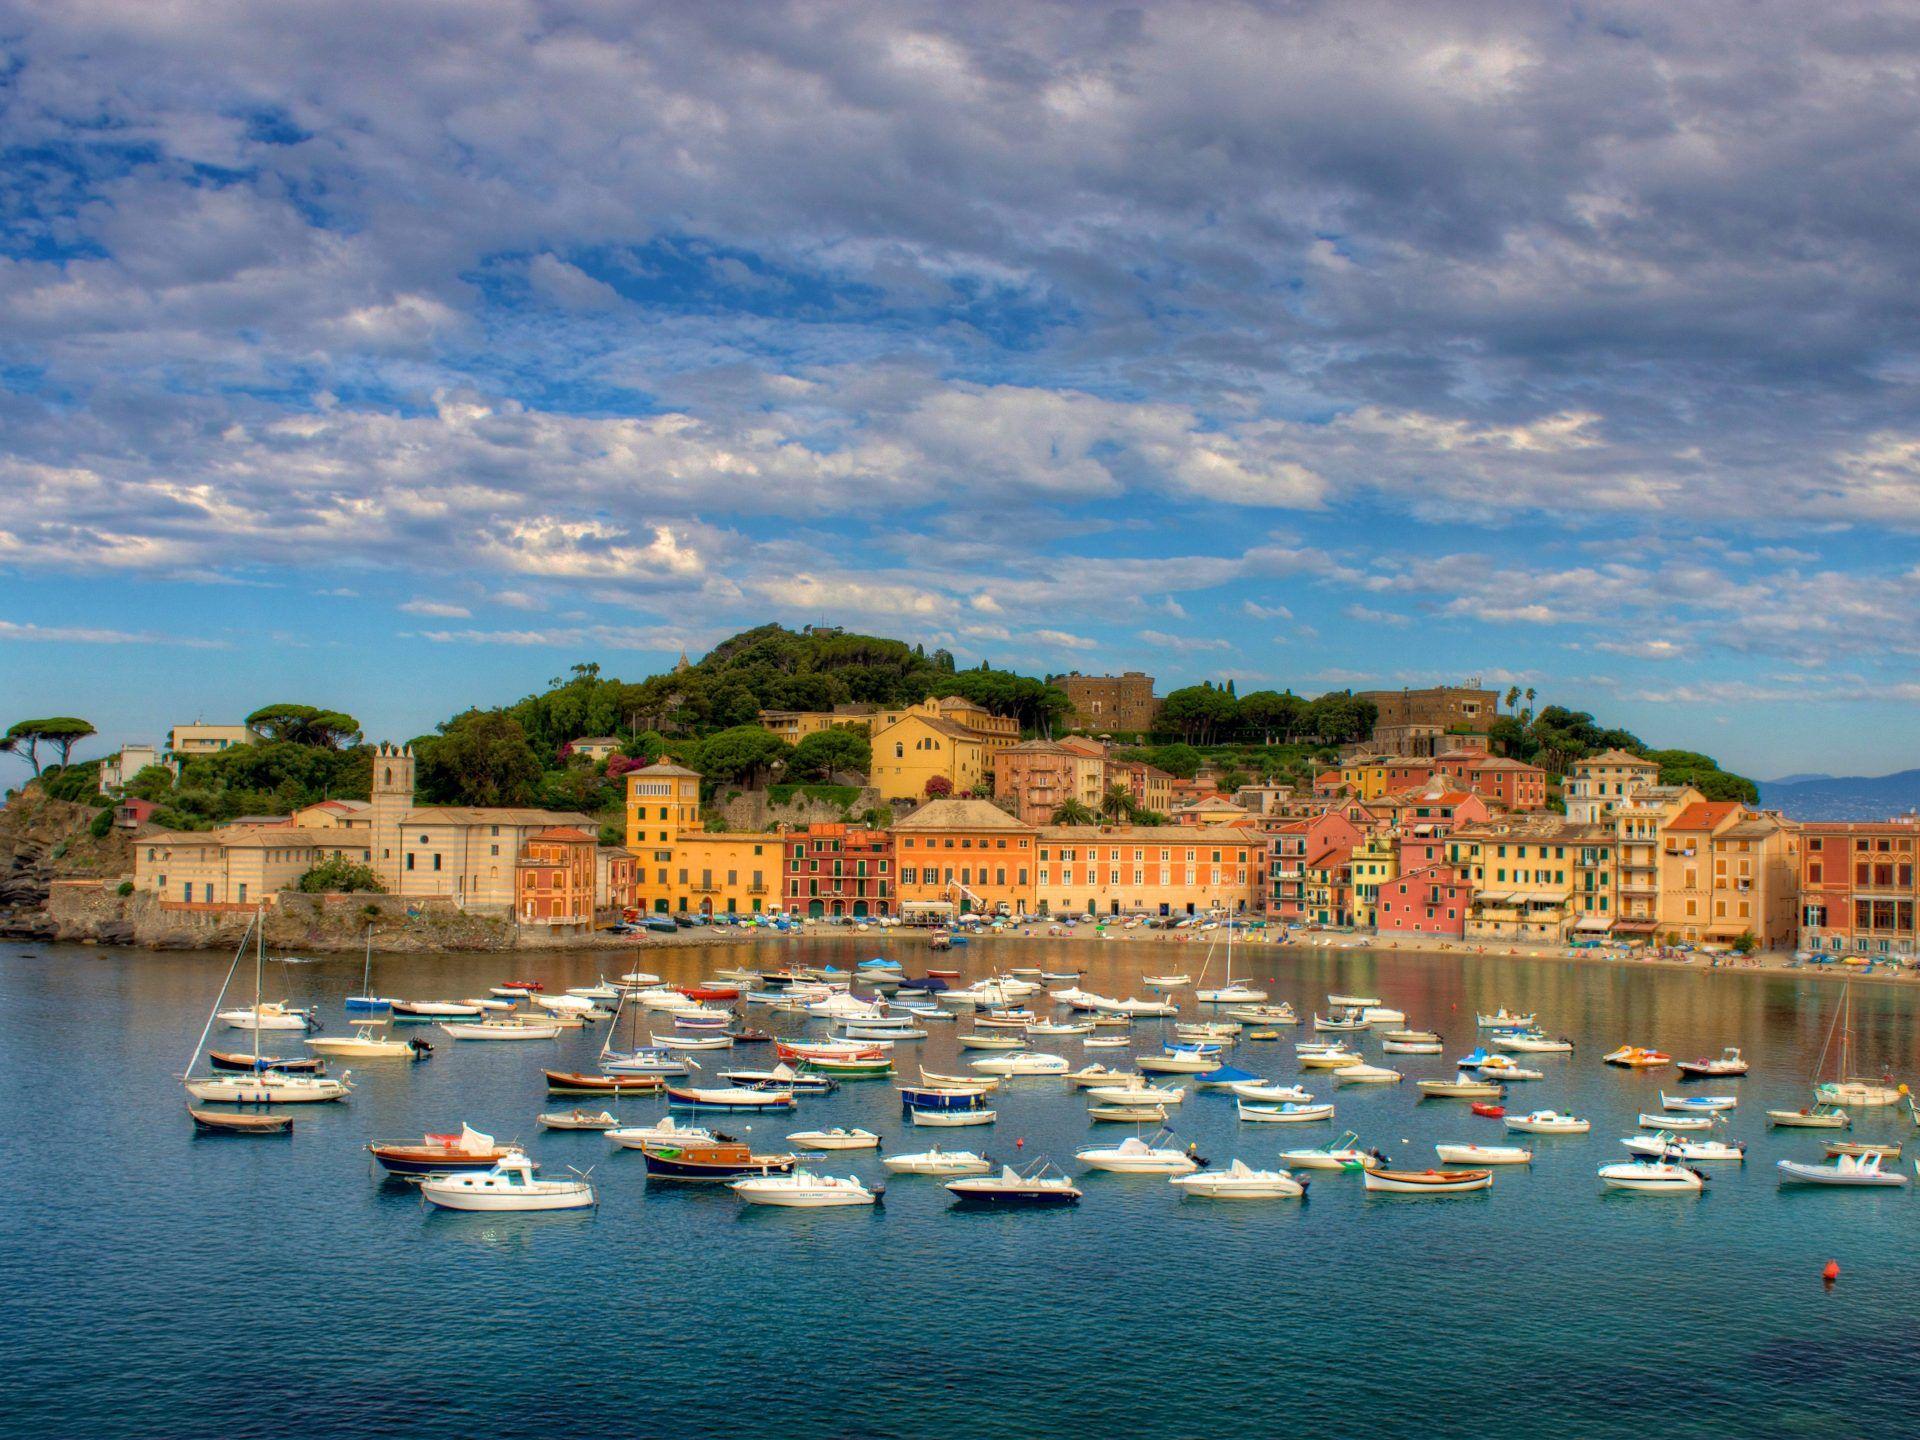 Sestri Levante Is A Town And Comune In Liguria, Italy. Lying On